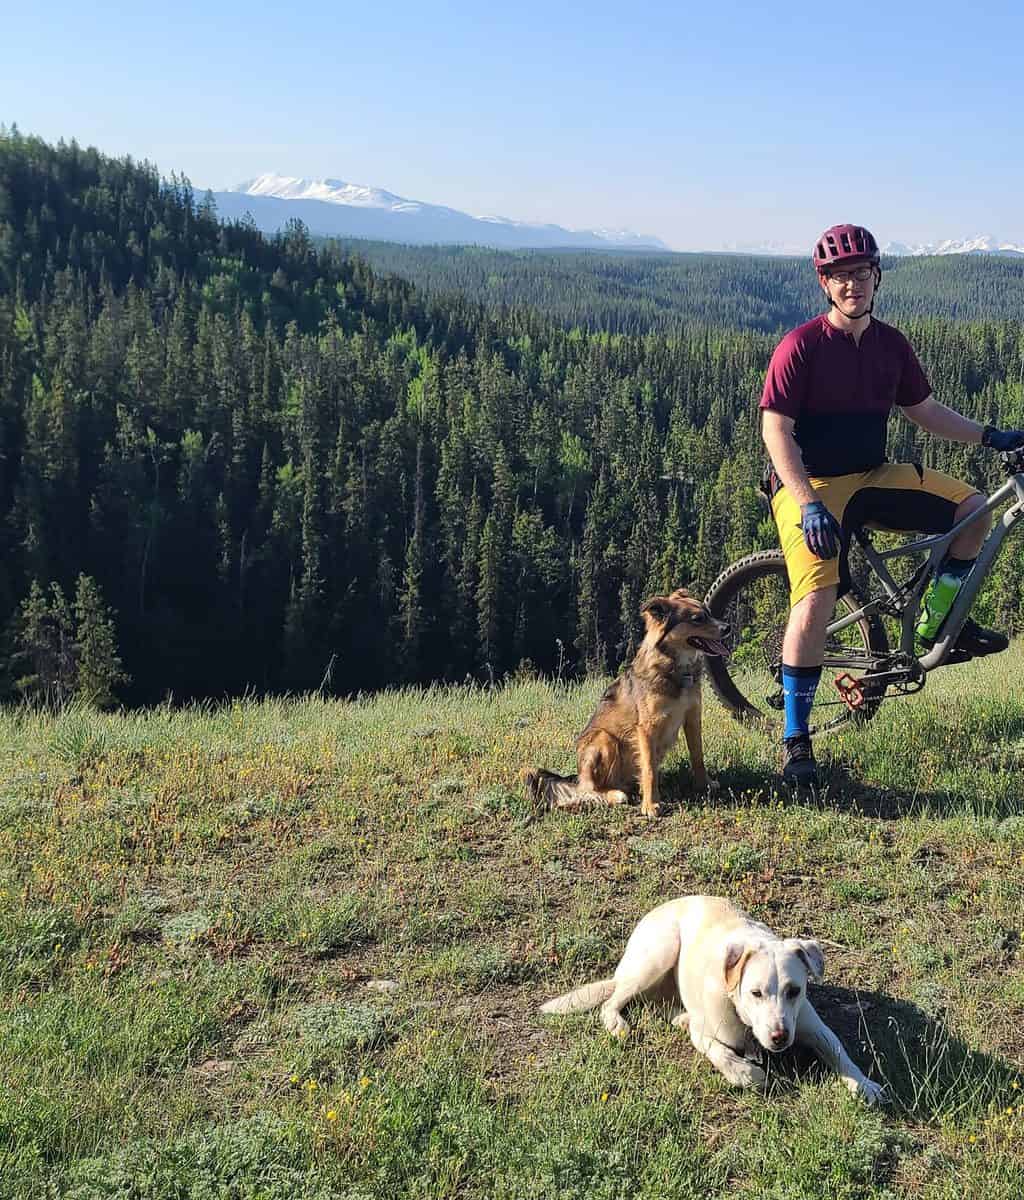 A man on a mountain bike with two dogs